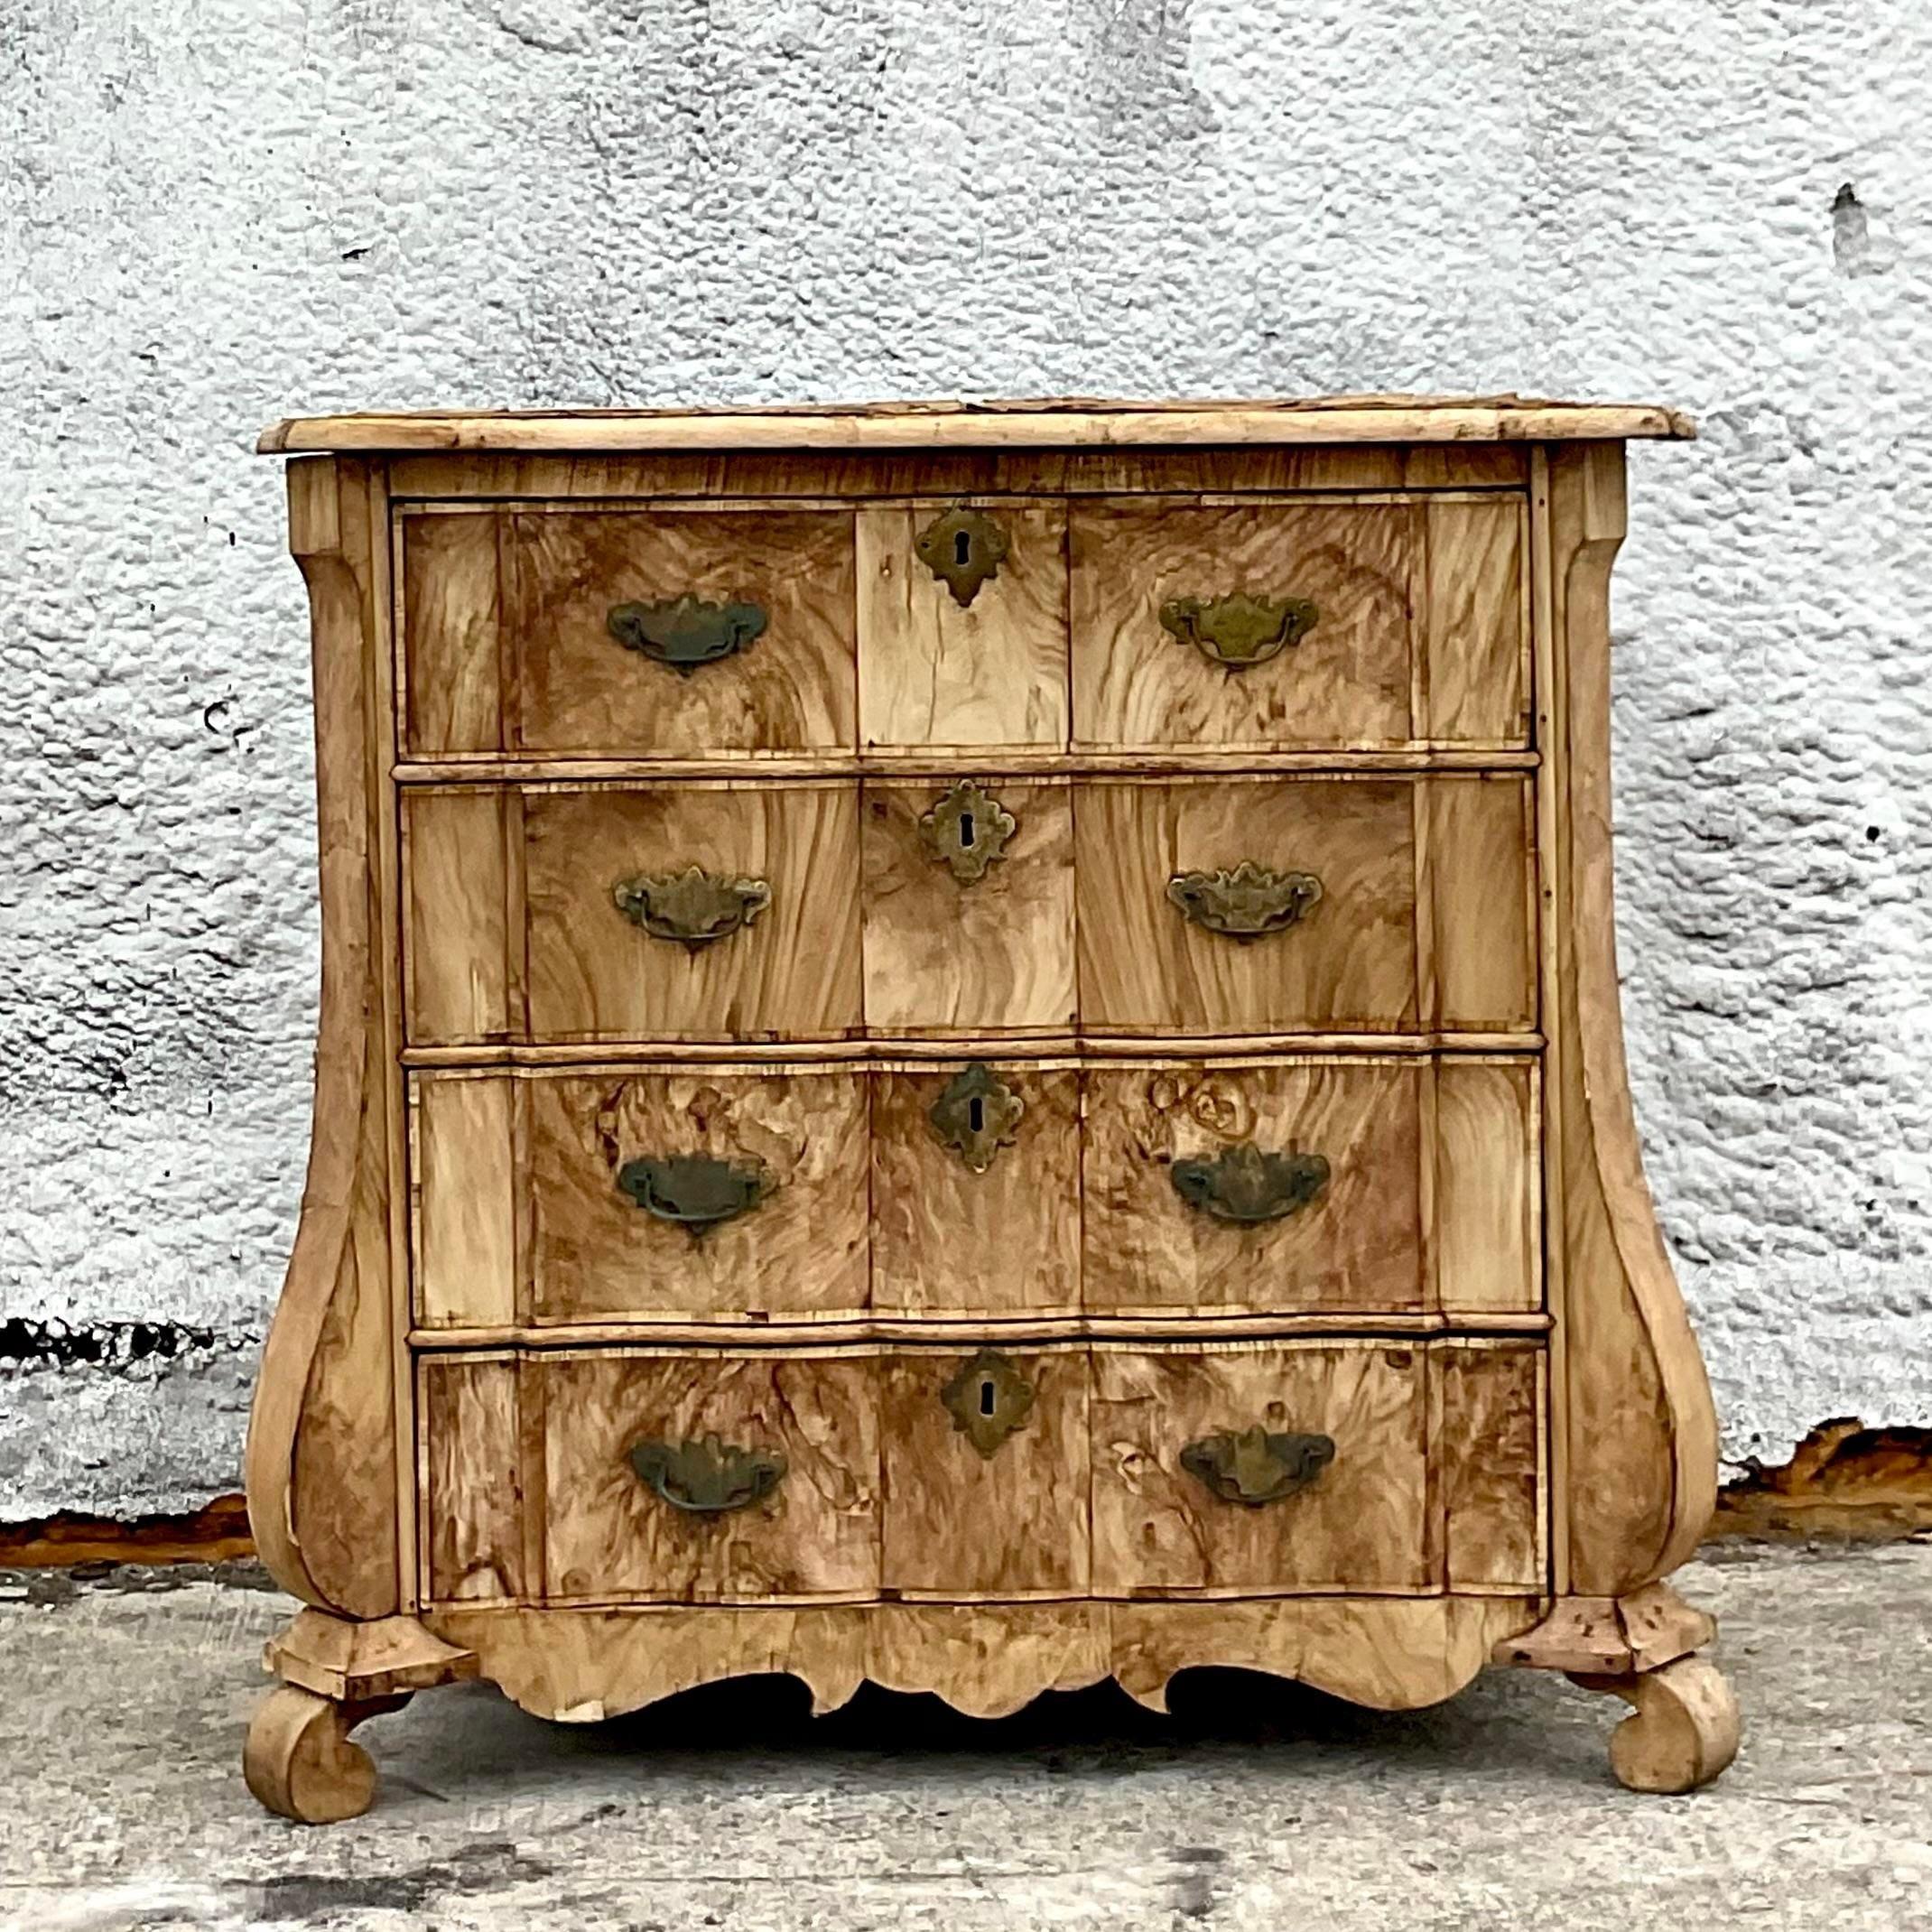 A fabulous vintage distressed chest of drawers. A gorgeous bleached Burl wood in a classic Bombe shape. An all over patina from time. This piece is extraordinary, but it’s a look for sure. You must like this look. Acquired from a Palm Beach estate